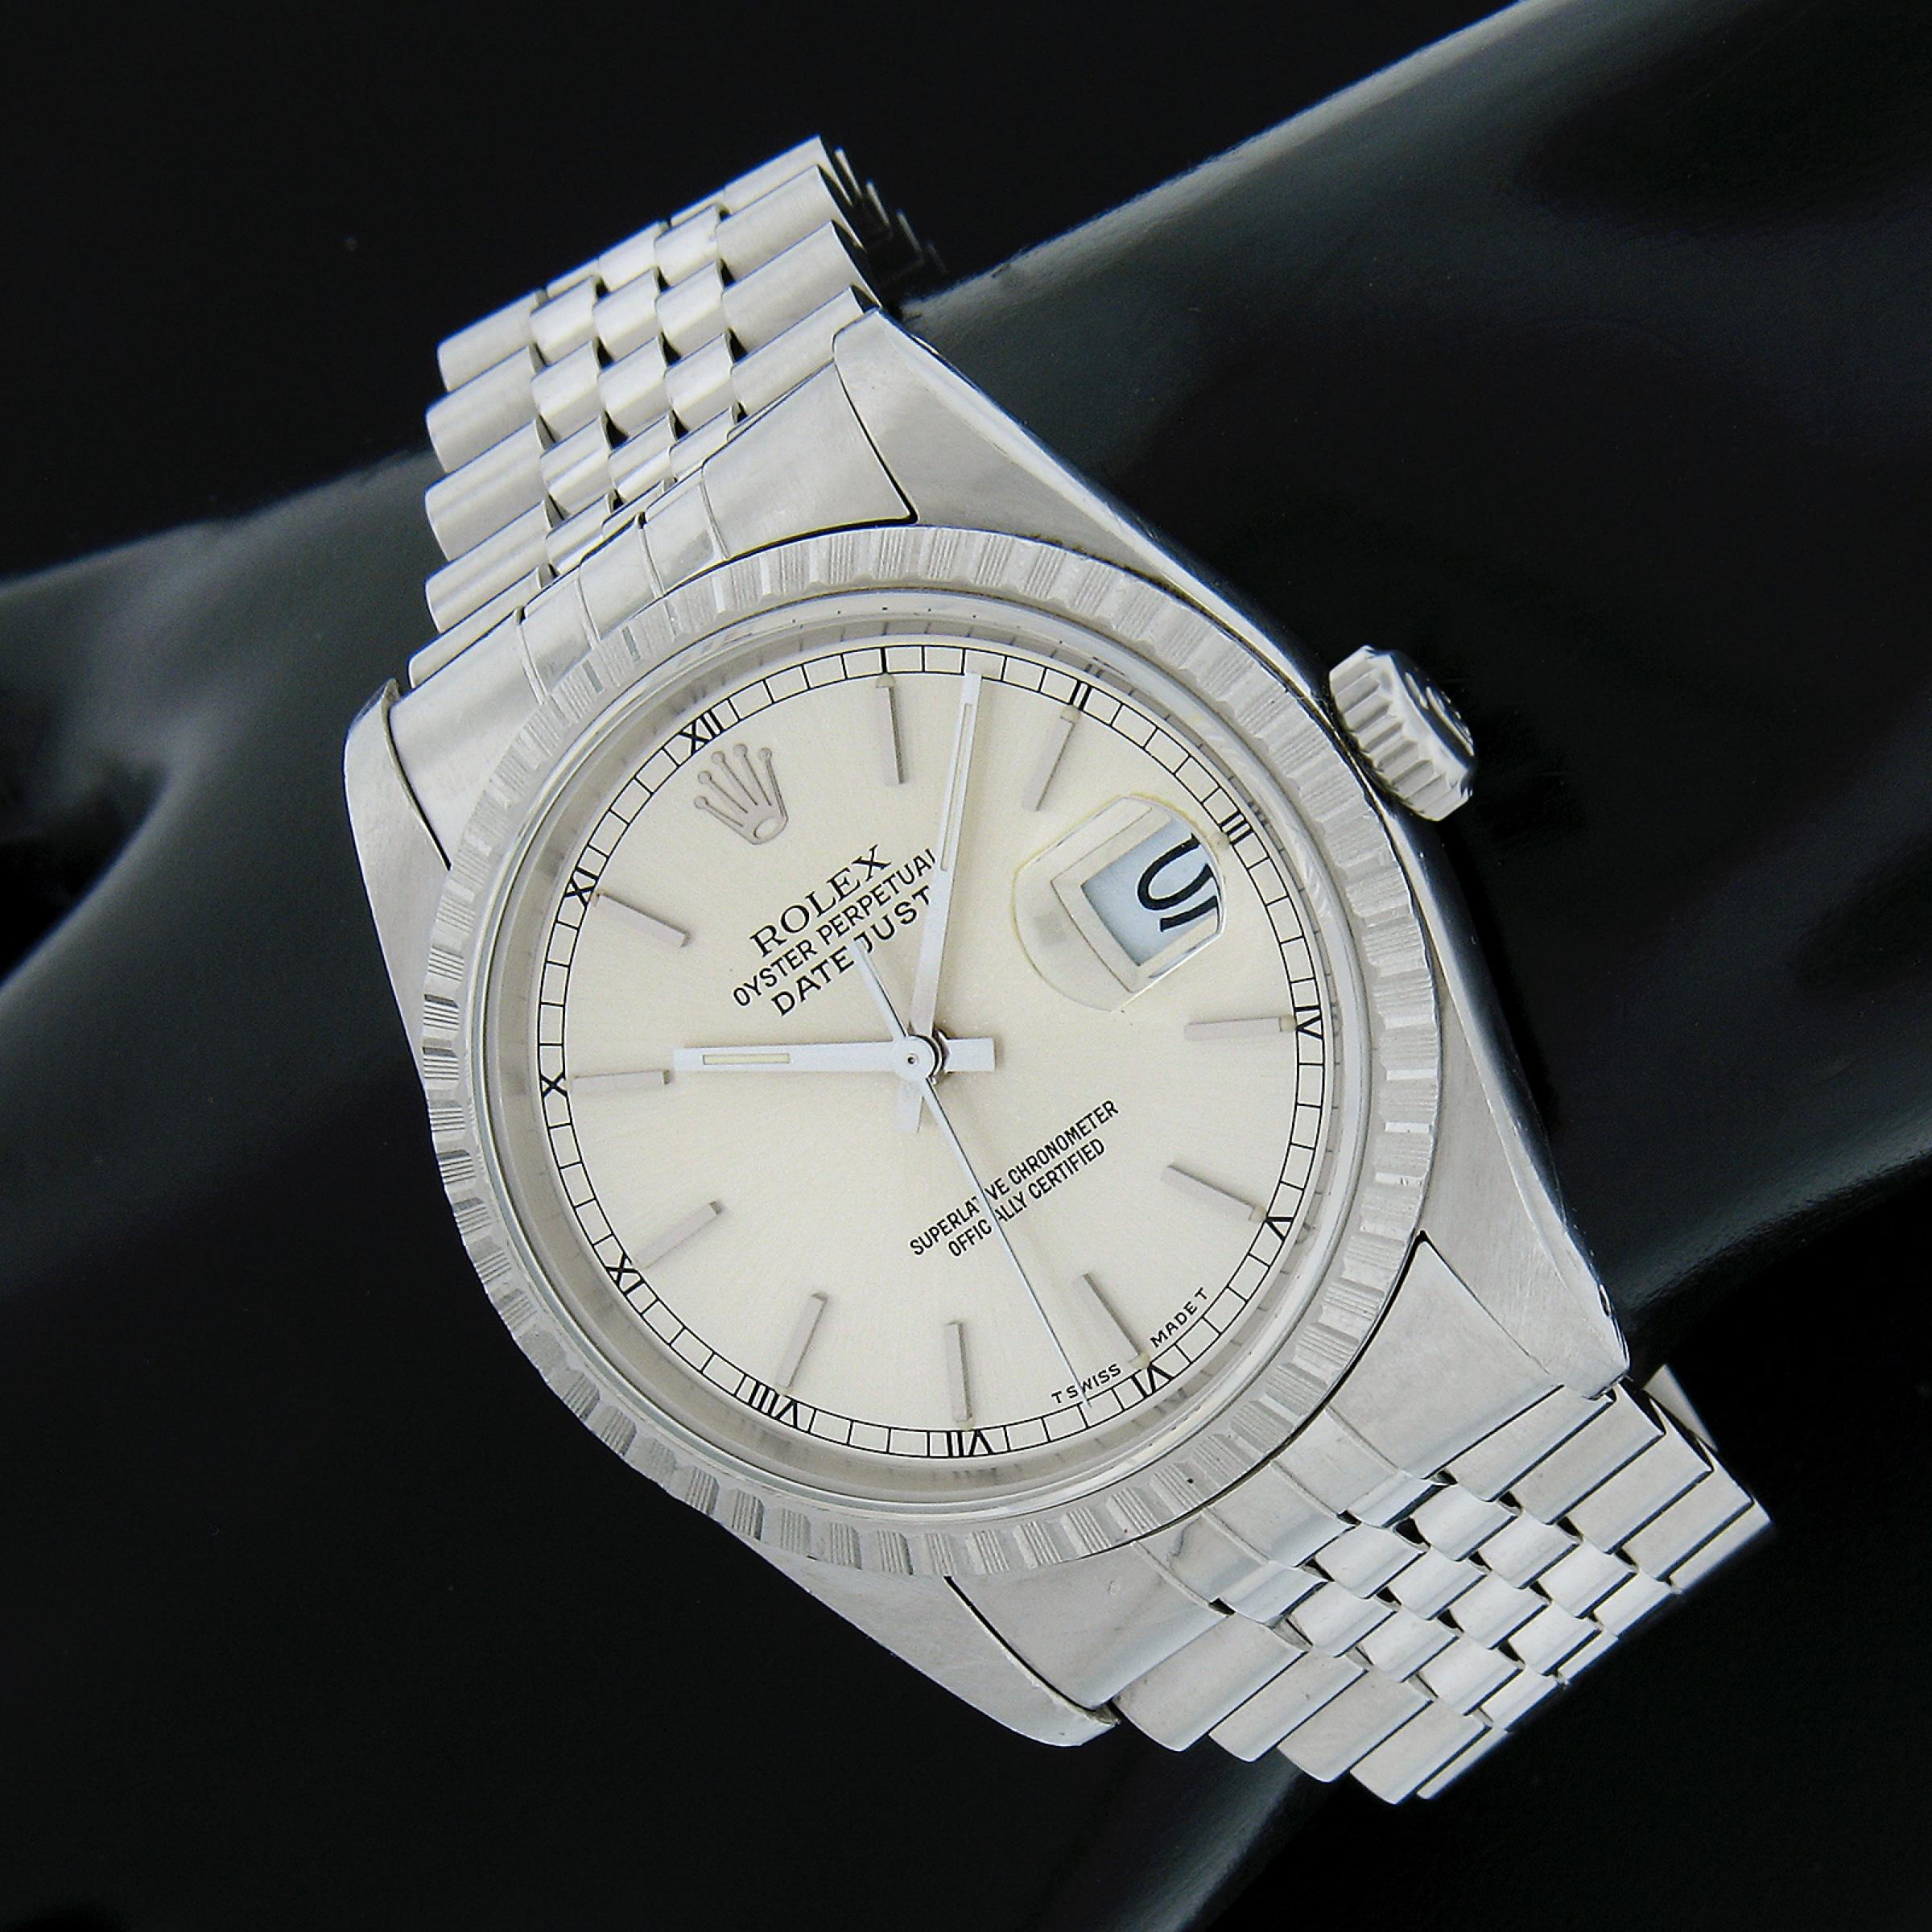 This classic unisex vintage Rolex Datejust wrist watch is circa 1989 and reference 16220. Features a classic silver dial, stainless steel jubilee bracelet and original engine turned style bezel. The automatic self-winding movement runs smoothly and